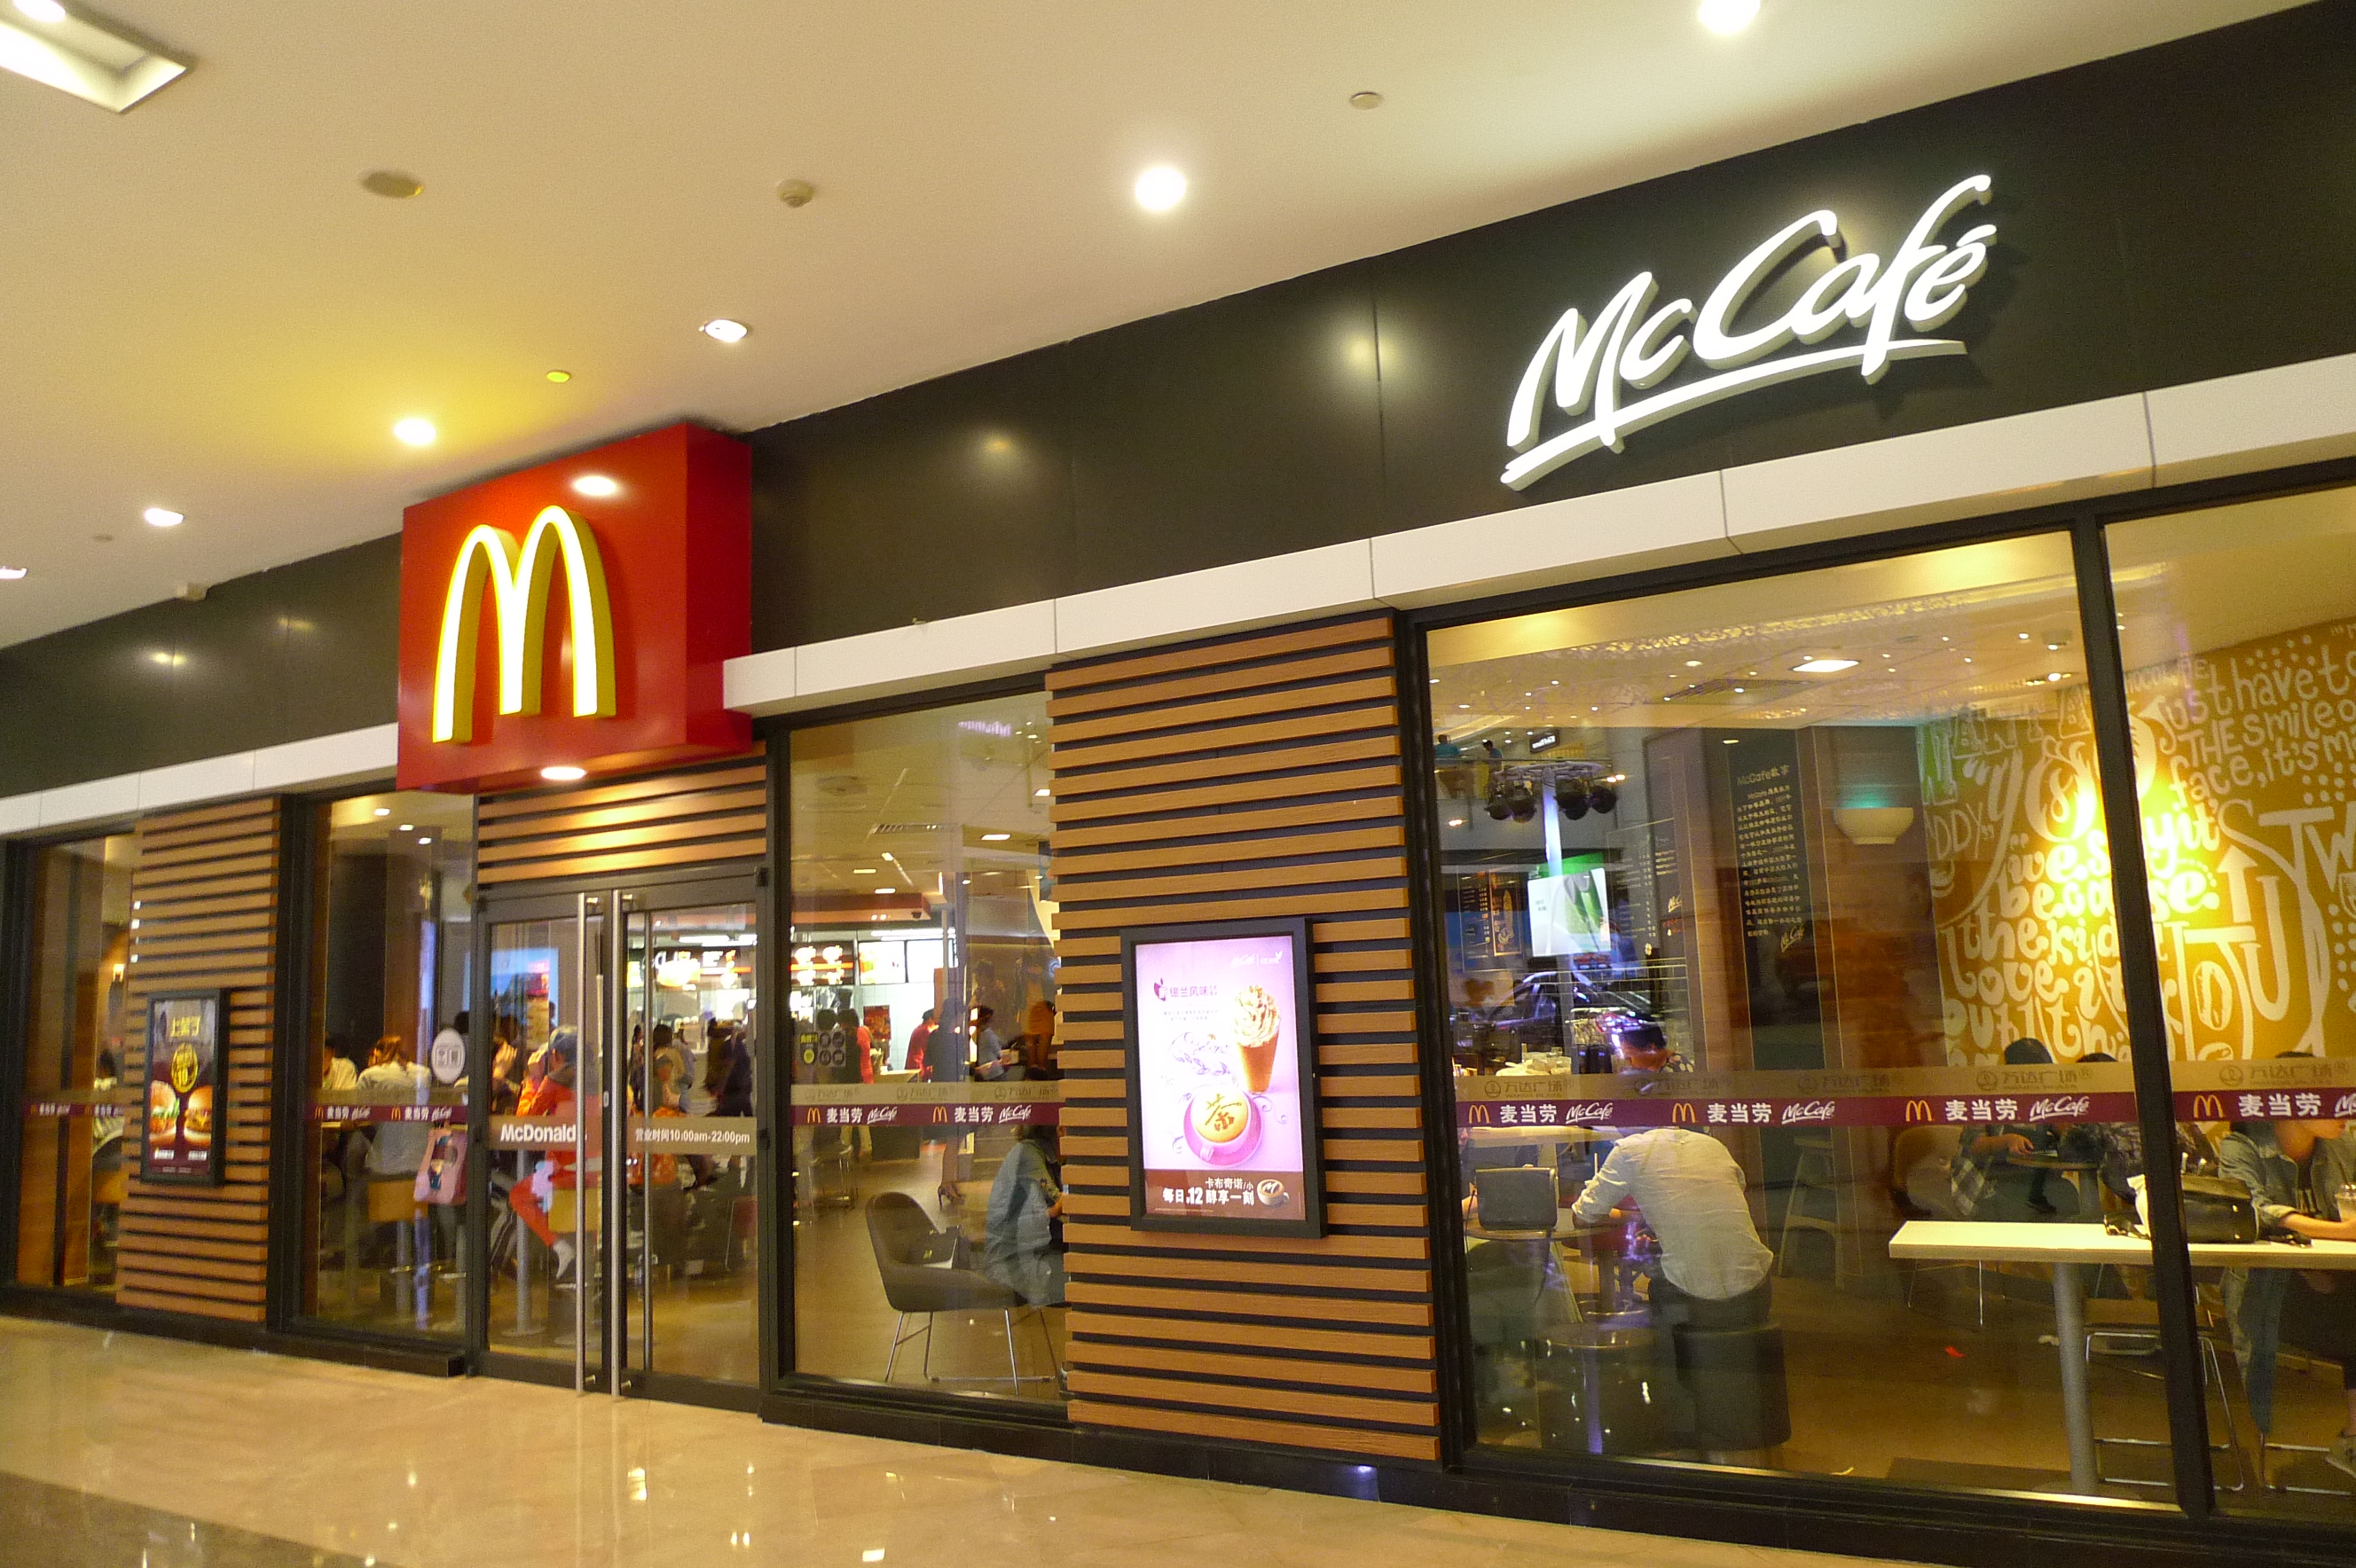 McDonald’s Assumes New ‘Golden Arches’ Name in China